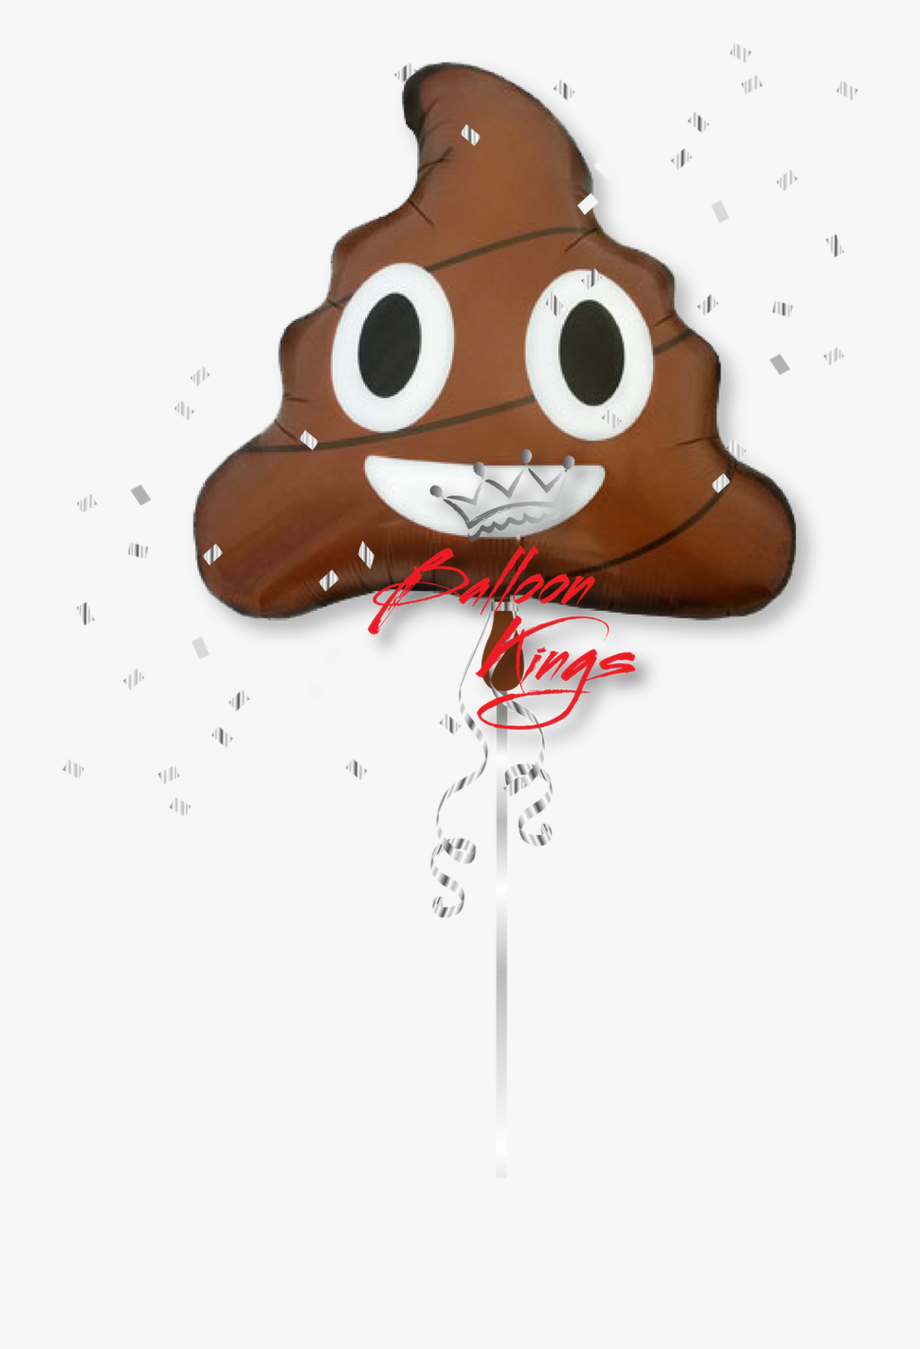 poop clipart animated